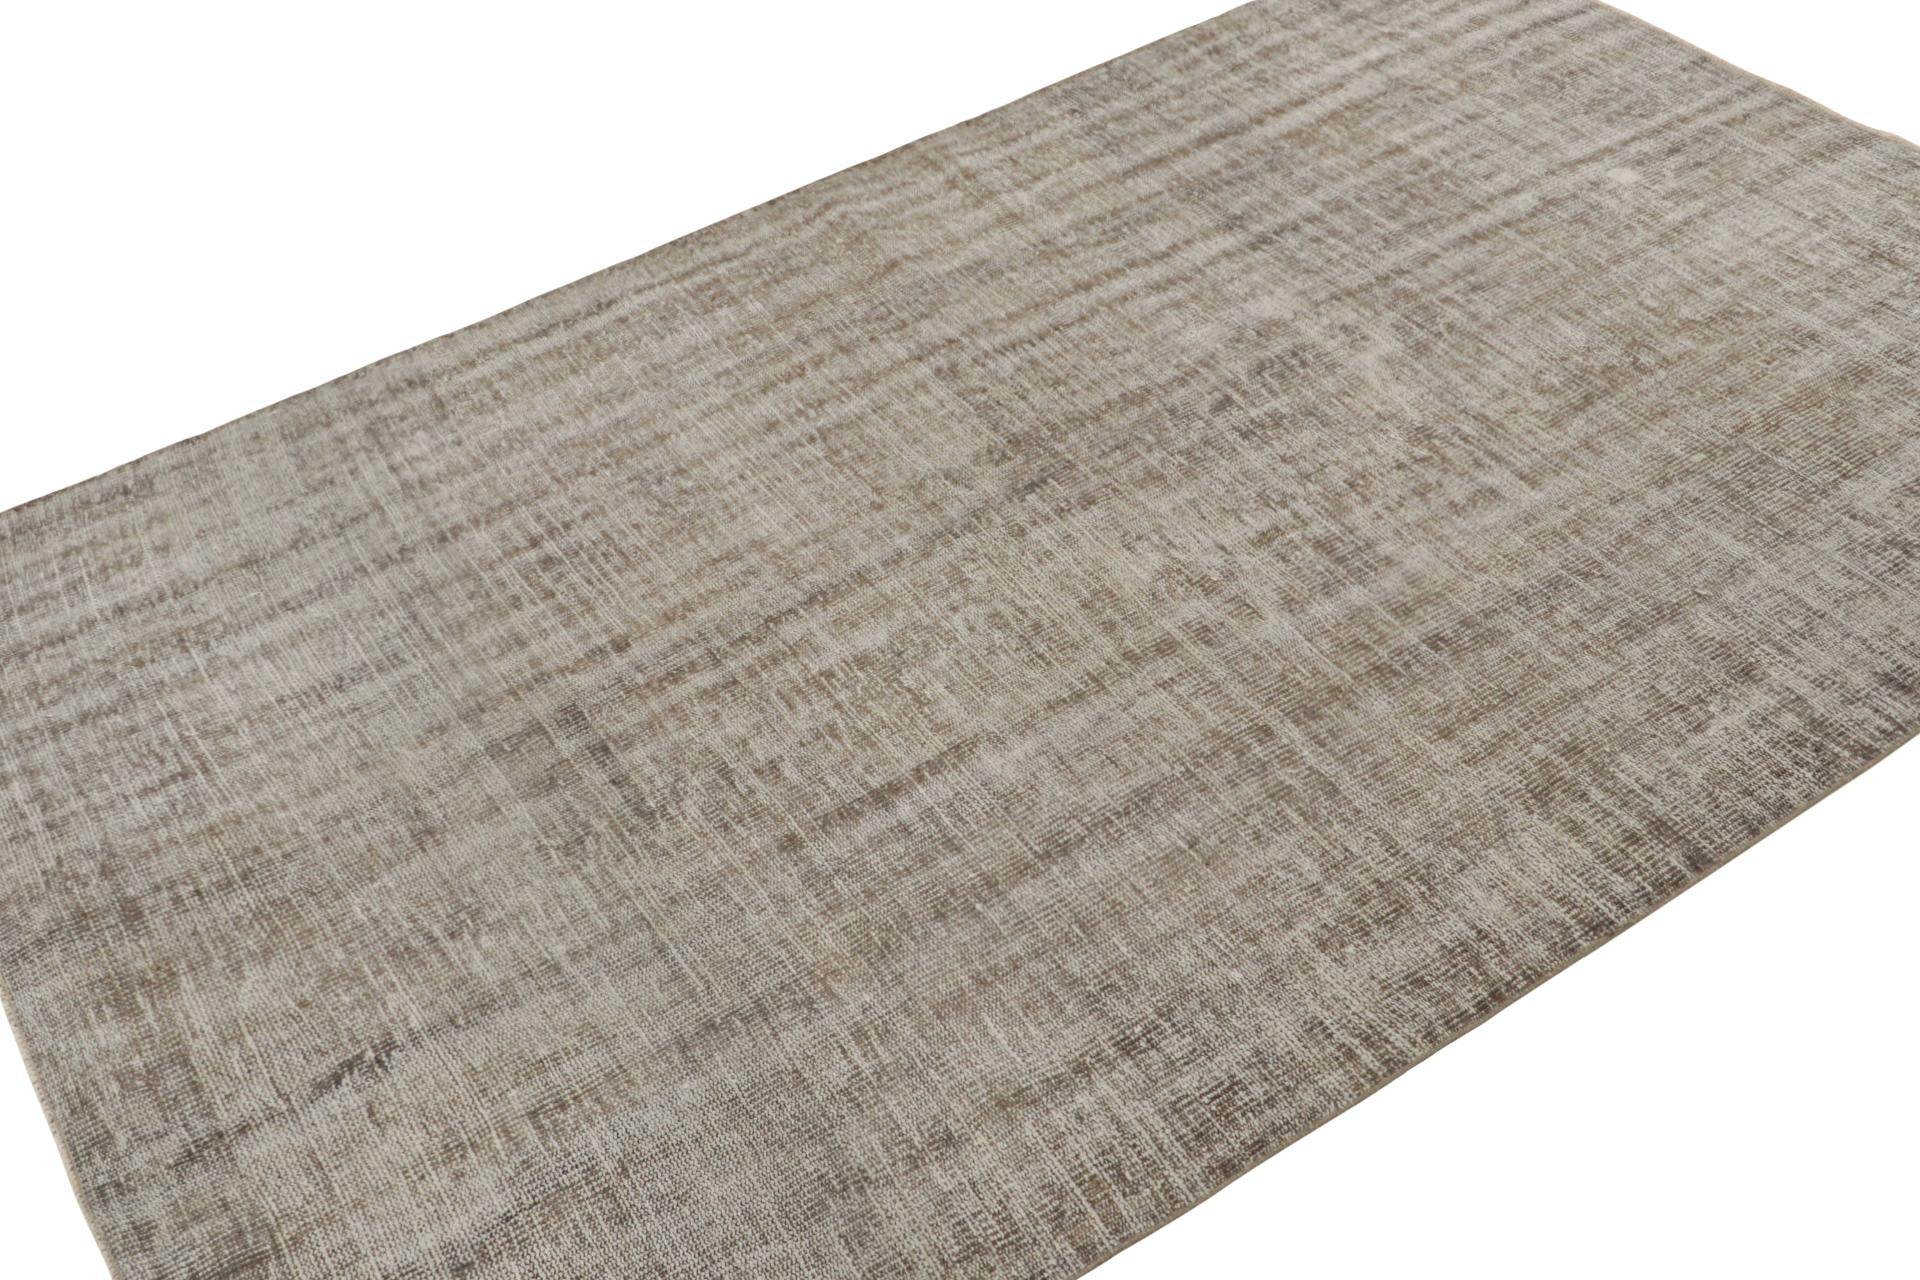 This vintage 6x9 rug, hand-knotted in wool, circa 1960-1970,  is a subdued piece, almost plain if it weren’t for the textural accent and the tone-on-tone element of striae it lends this play of beige-brown and gray hues  

On the Design: